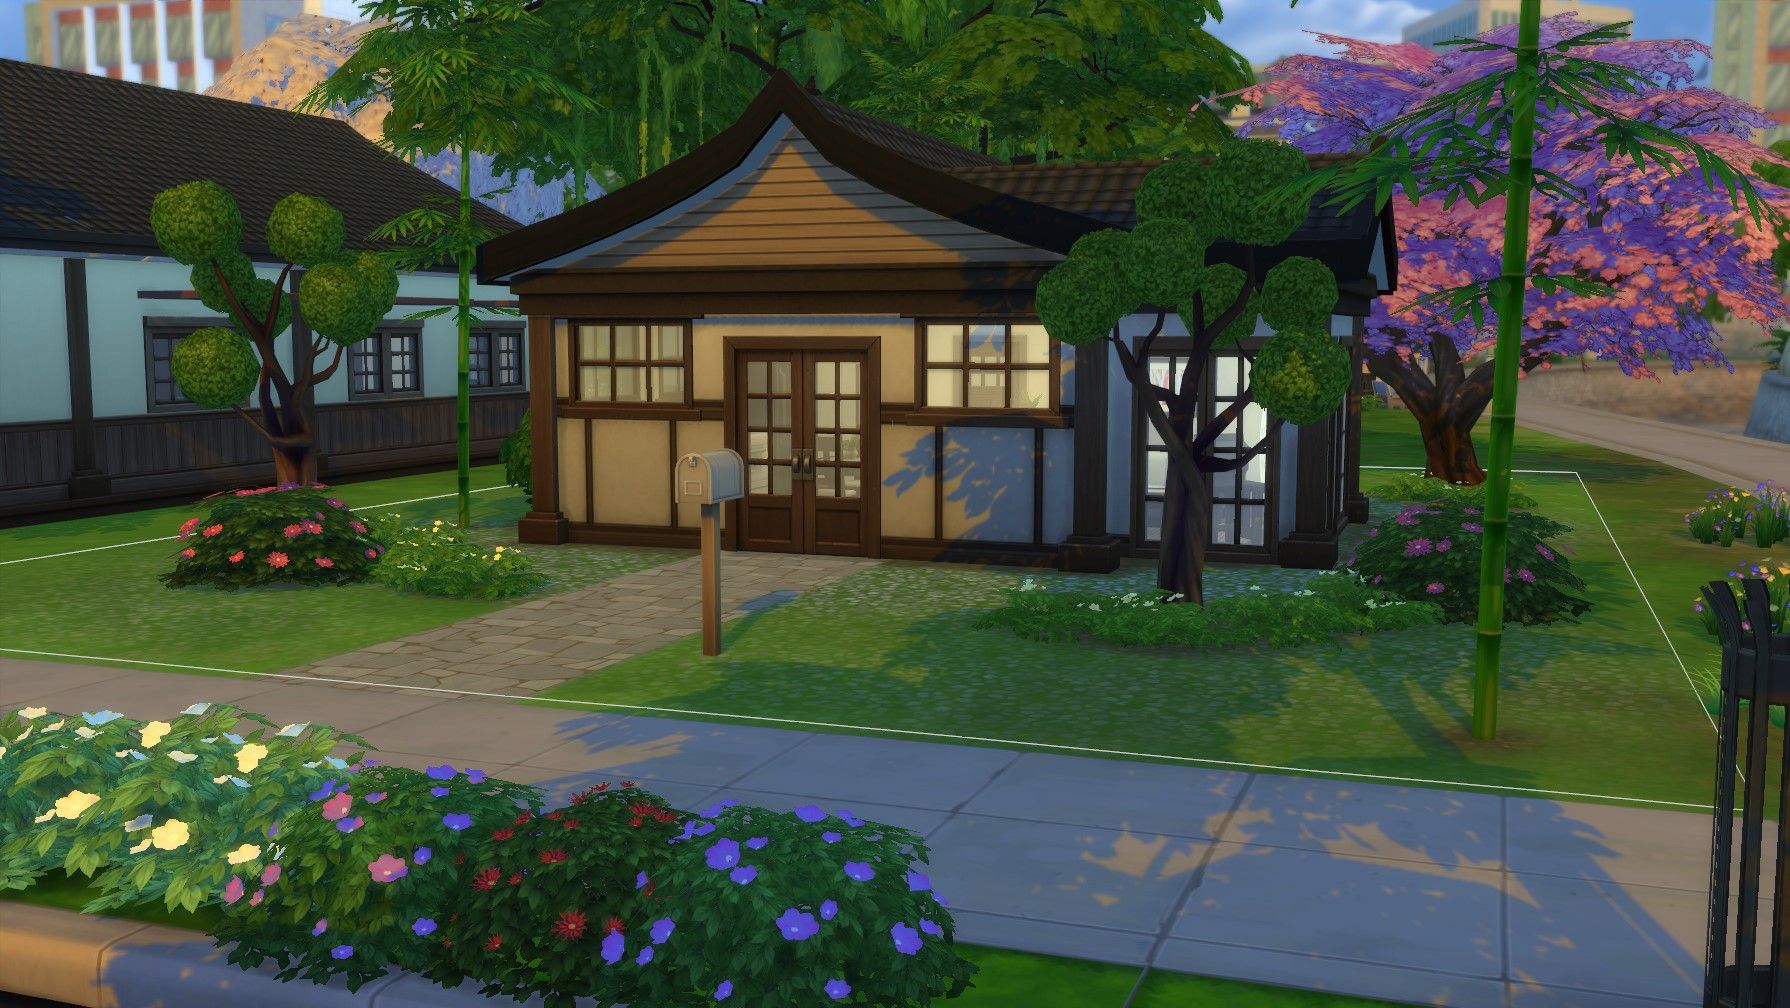 The Sims 4 Builds to Play In Before Snowy Escape's Release